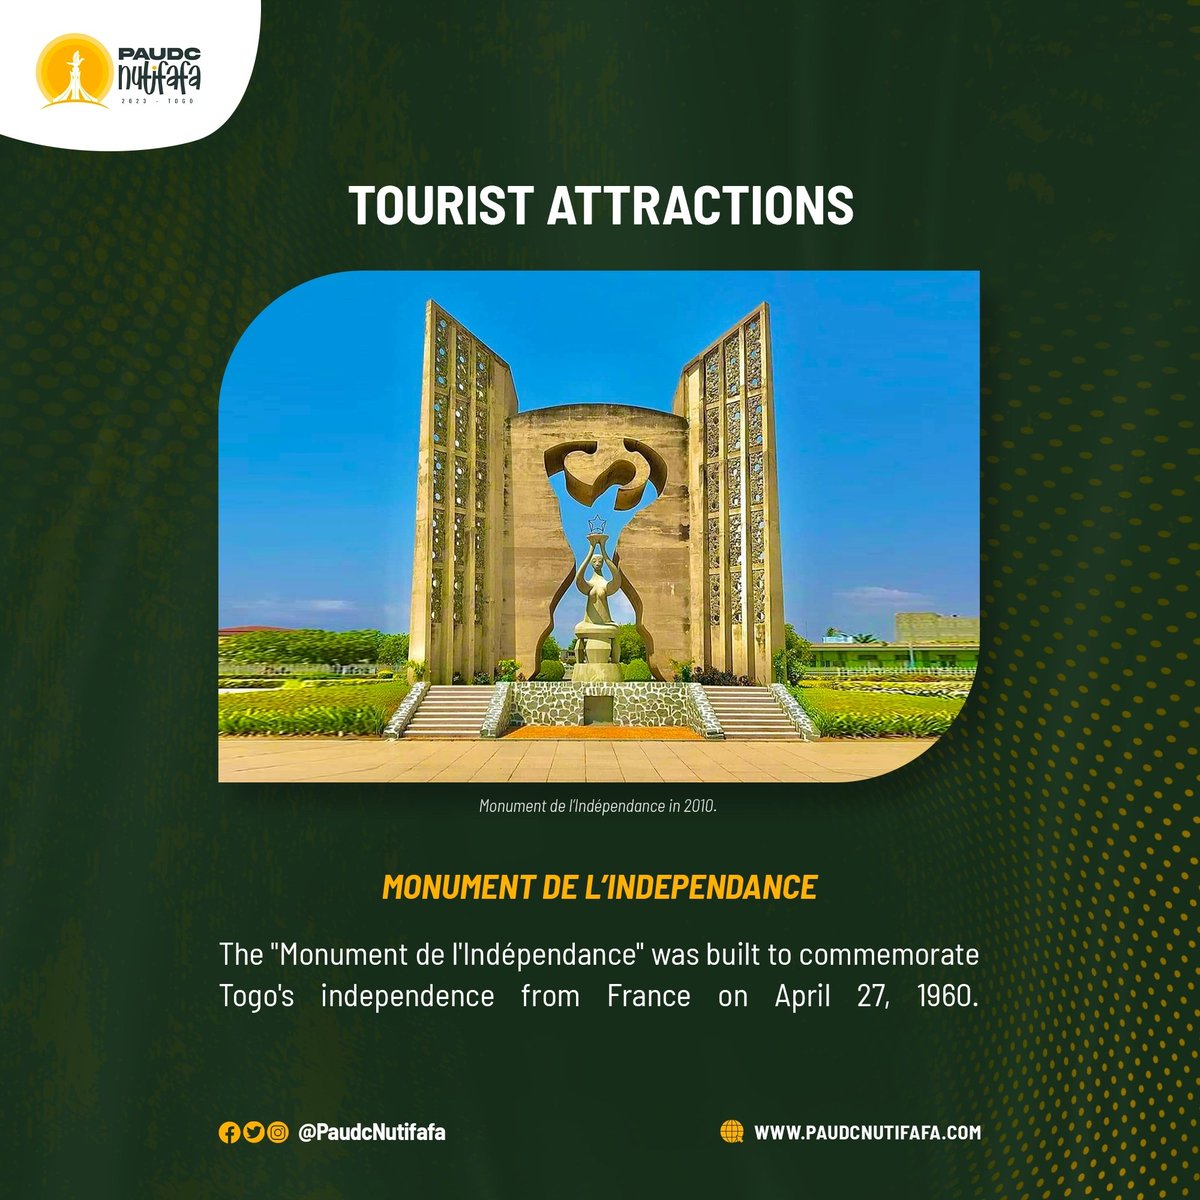 Miawoezon
On April 27, 1960, Togo declared its independence, and this iconic monument commemorates that day. Take a moment to visit this historic site, just 20 minutes away from the University of Lomé.  
#TogoIndependence  #ExploreTogo #paudcnutifafa #debate #miawoezon